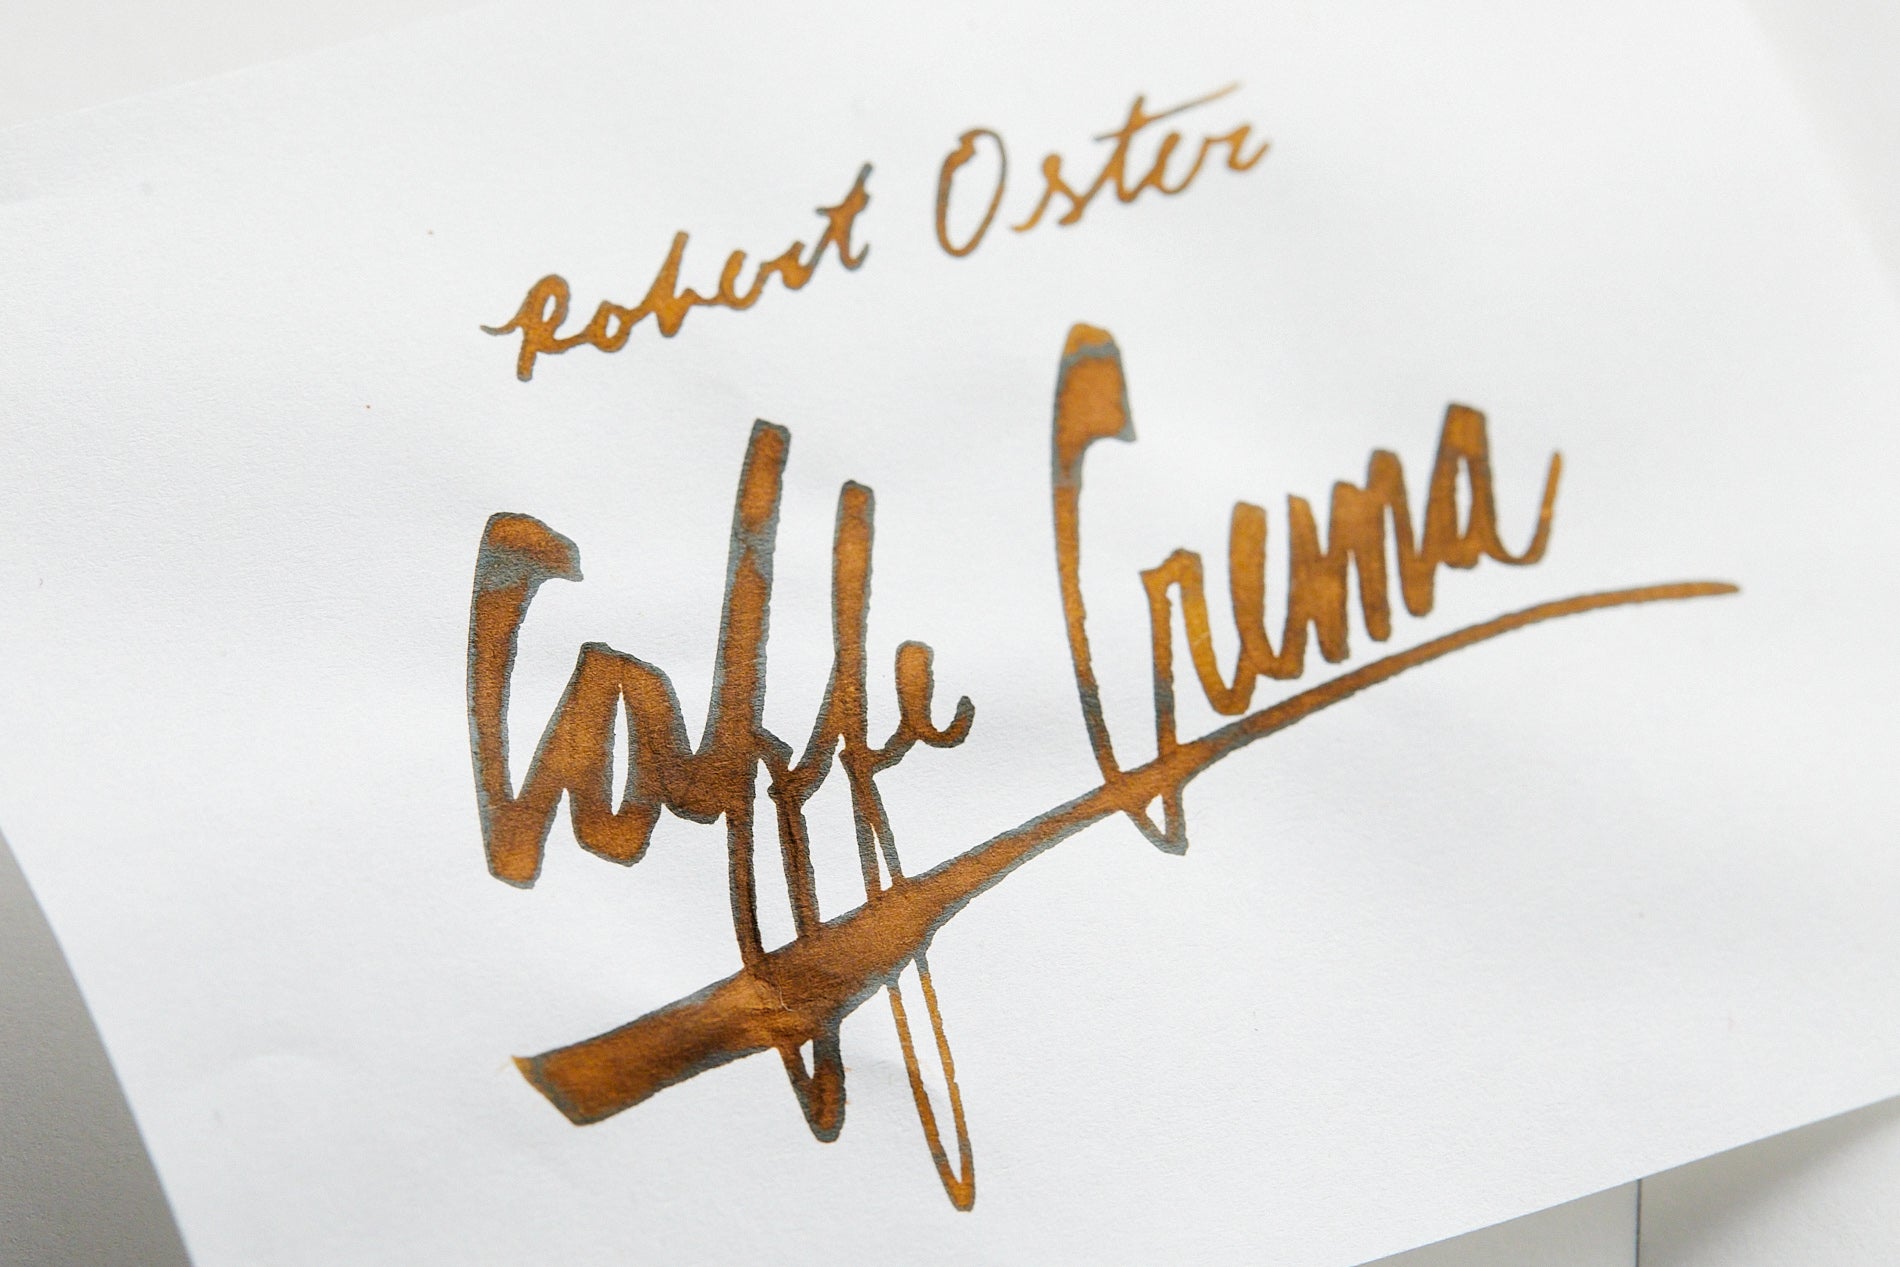 Robert Oster Caffe Crema fountain pen ink writing sample on white paper